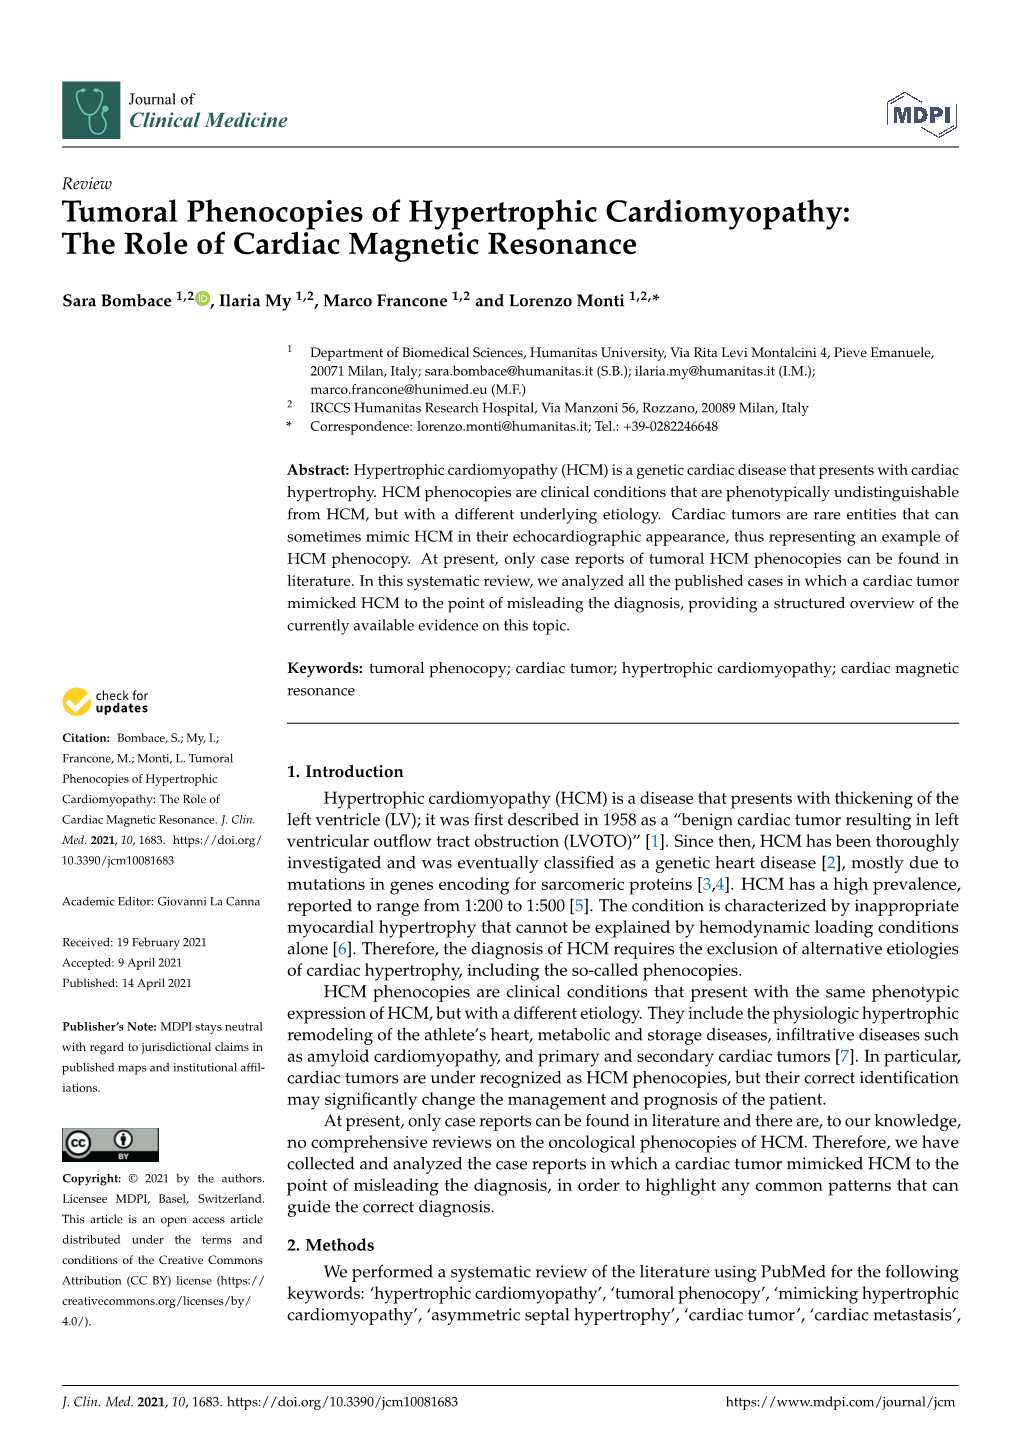 Tumoral Phenocopies of Hypertrophic Cardiomyopathy: the Role of Cardiac Magnetic Resonance